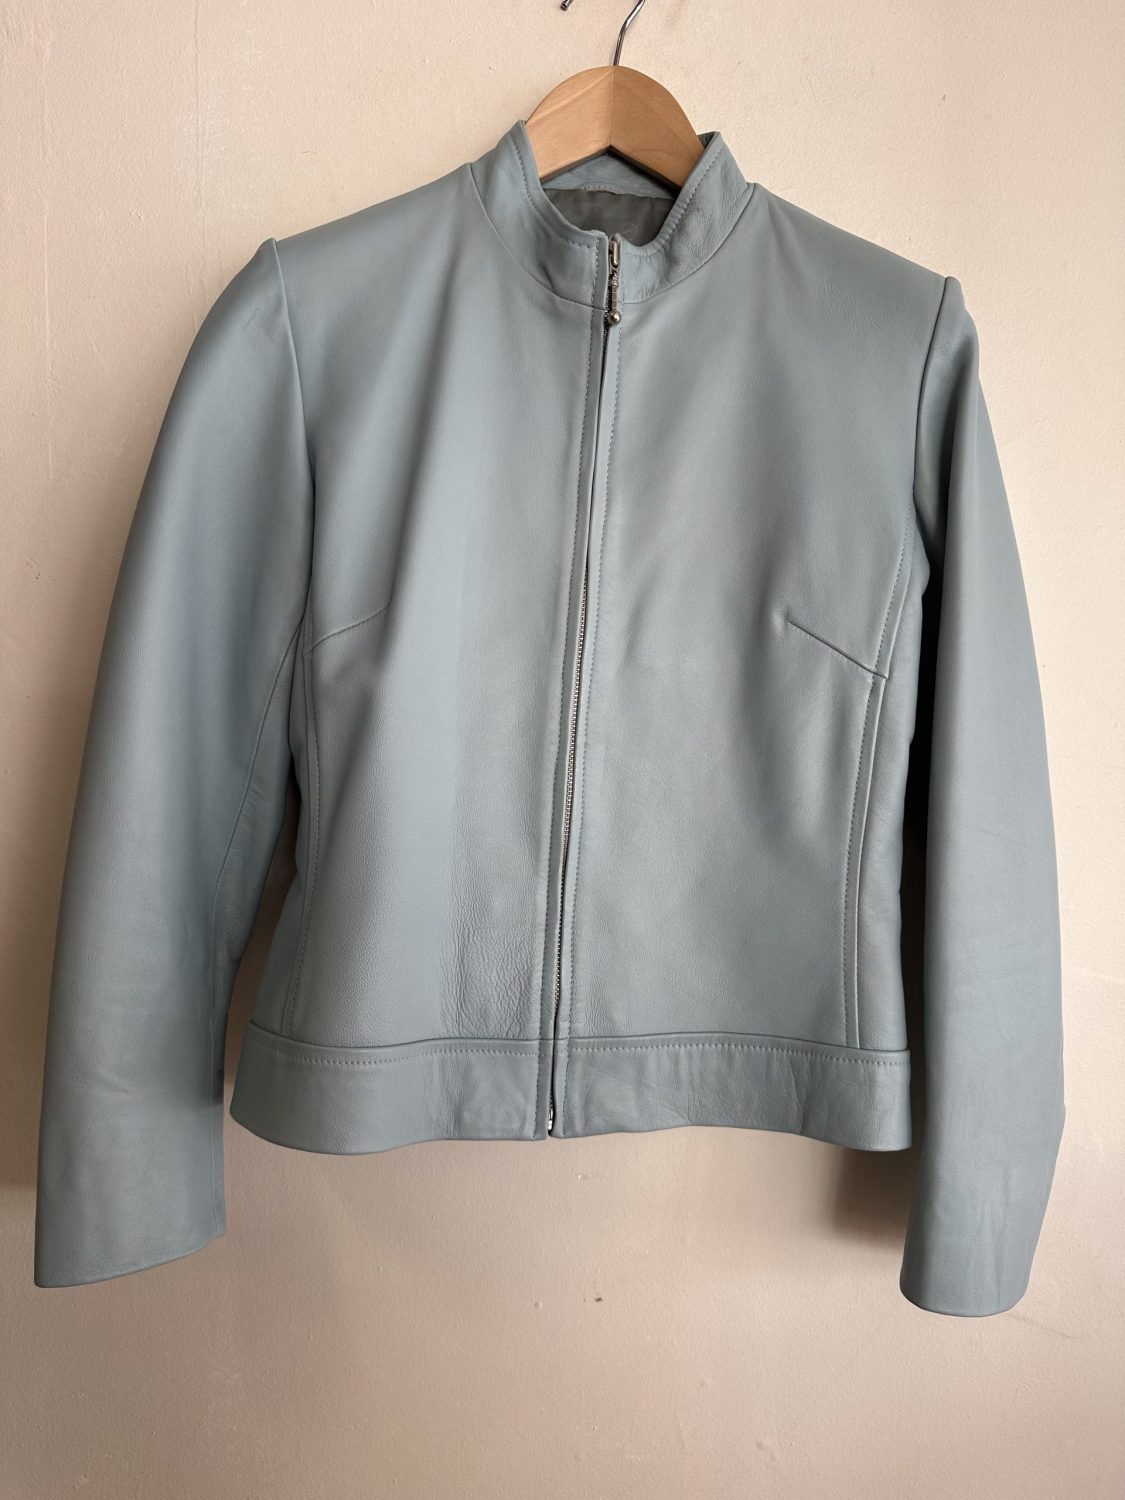 BABY BLUE VINTAGE LEATHER JACKET BY DORMEUIL OF ENGLAND | Chaos Bazaar ...